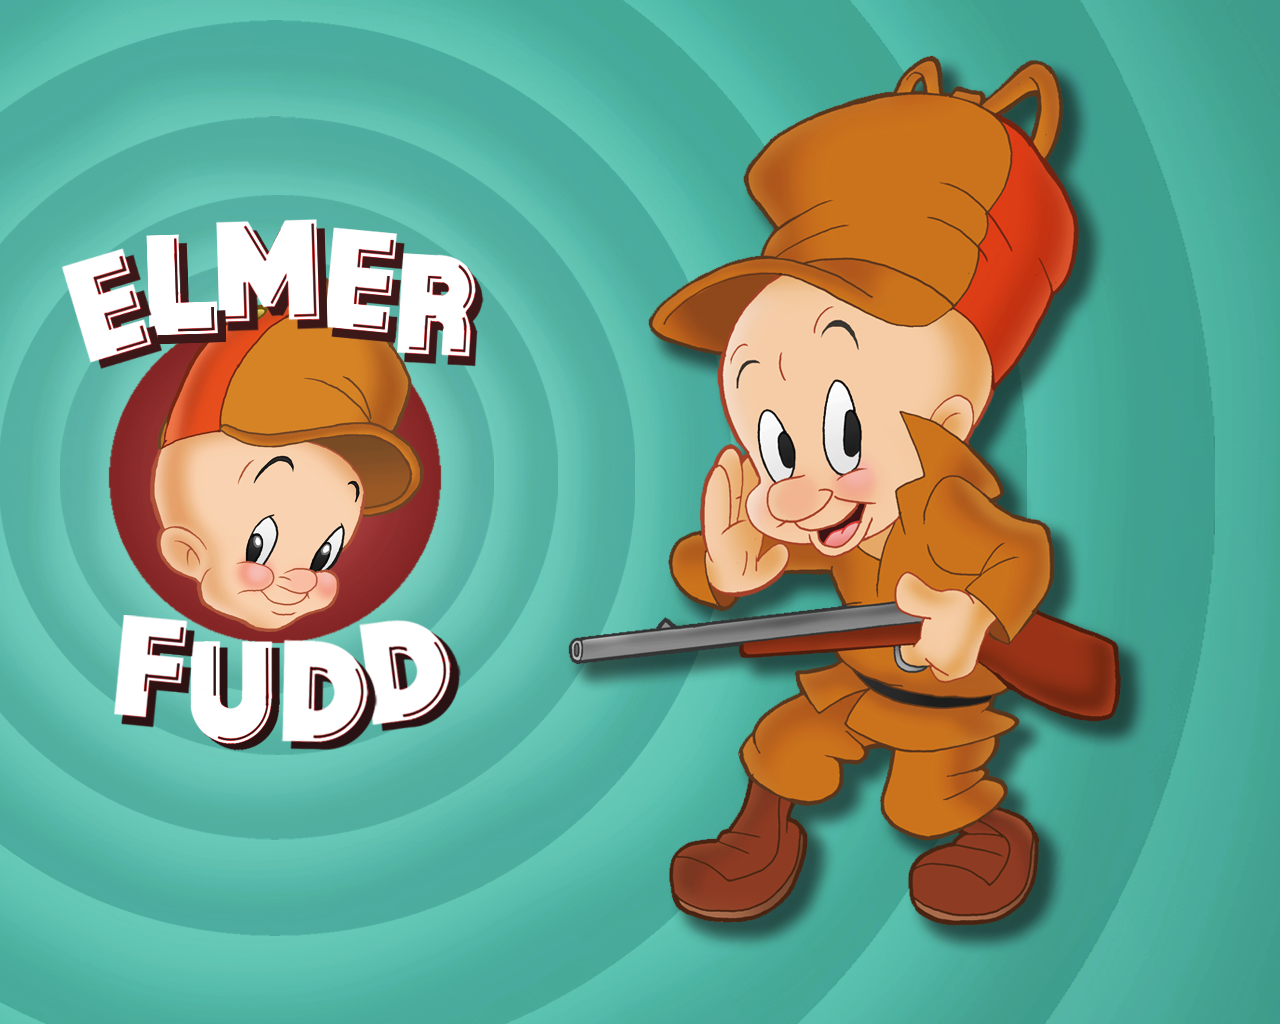 The term "nimrod" is often used as a synonym for a goofball. Wrongfully 

so. Nimrod was a famous hunter in the Old Testament. The confusion 

started from Bugs Bunny sarcastically calling Elmer Fudd, the goofy 

hunter in the Looney Toons cartoons a "Nimrod."